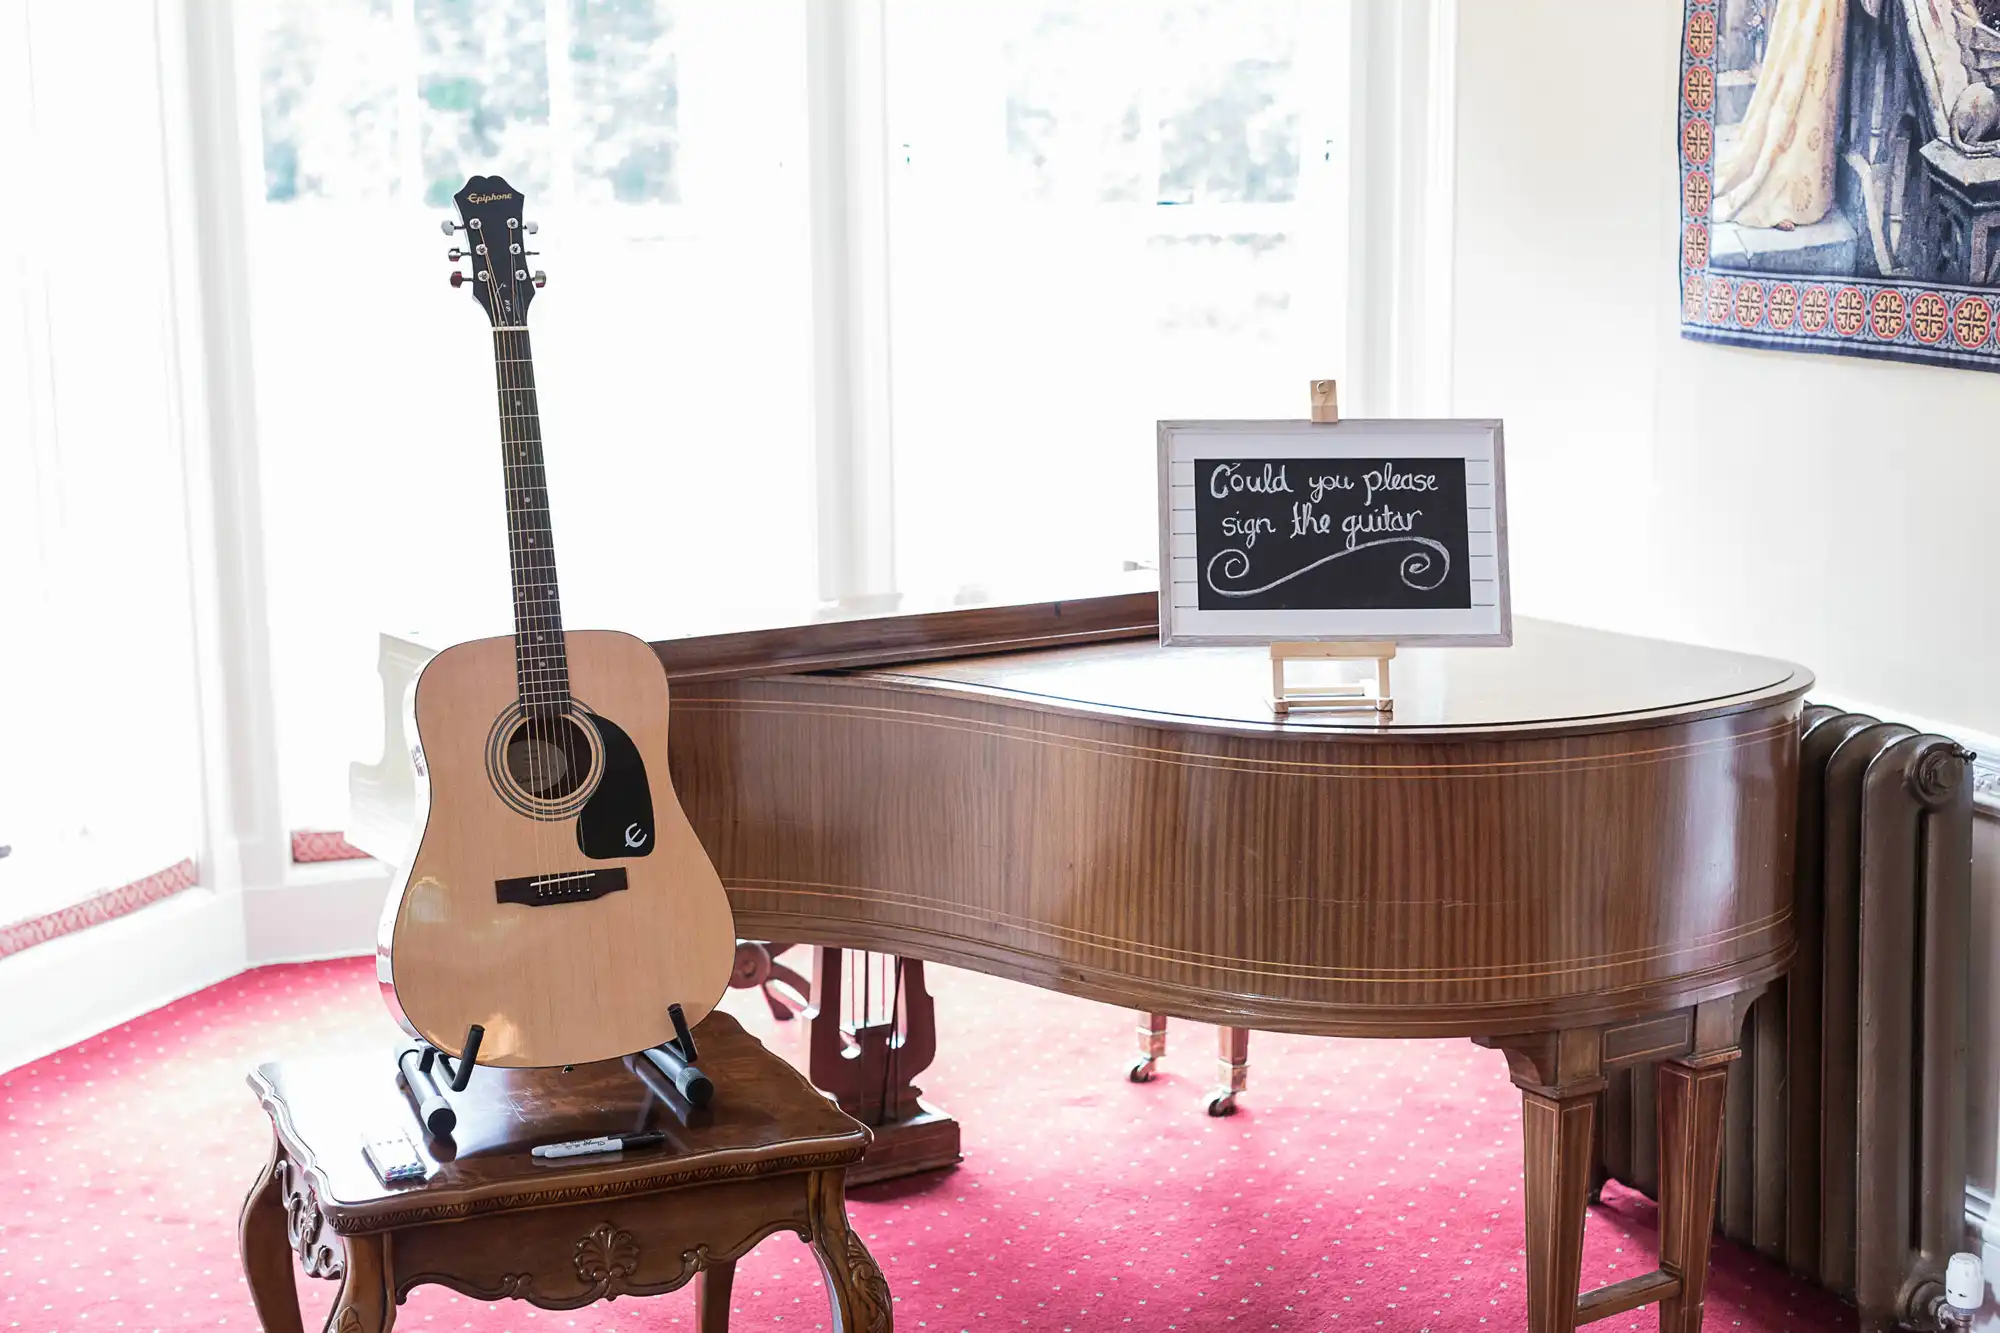 Acoustic guitar on a stand next to a grand piano with a sign saying "could you please sign the guitar" in a well-lit room with a painting on the wall.